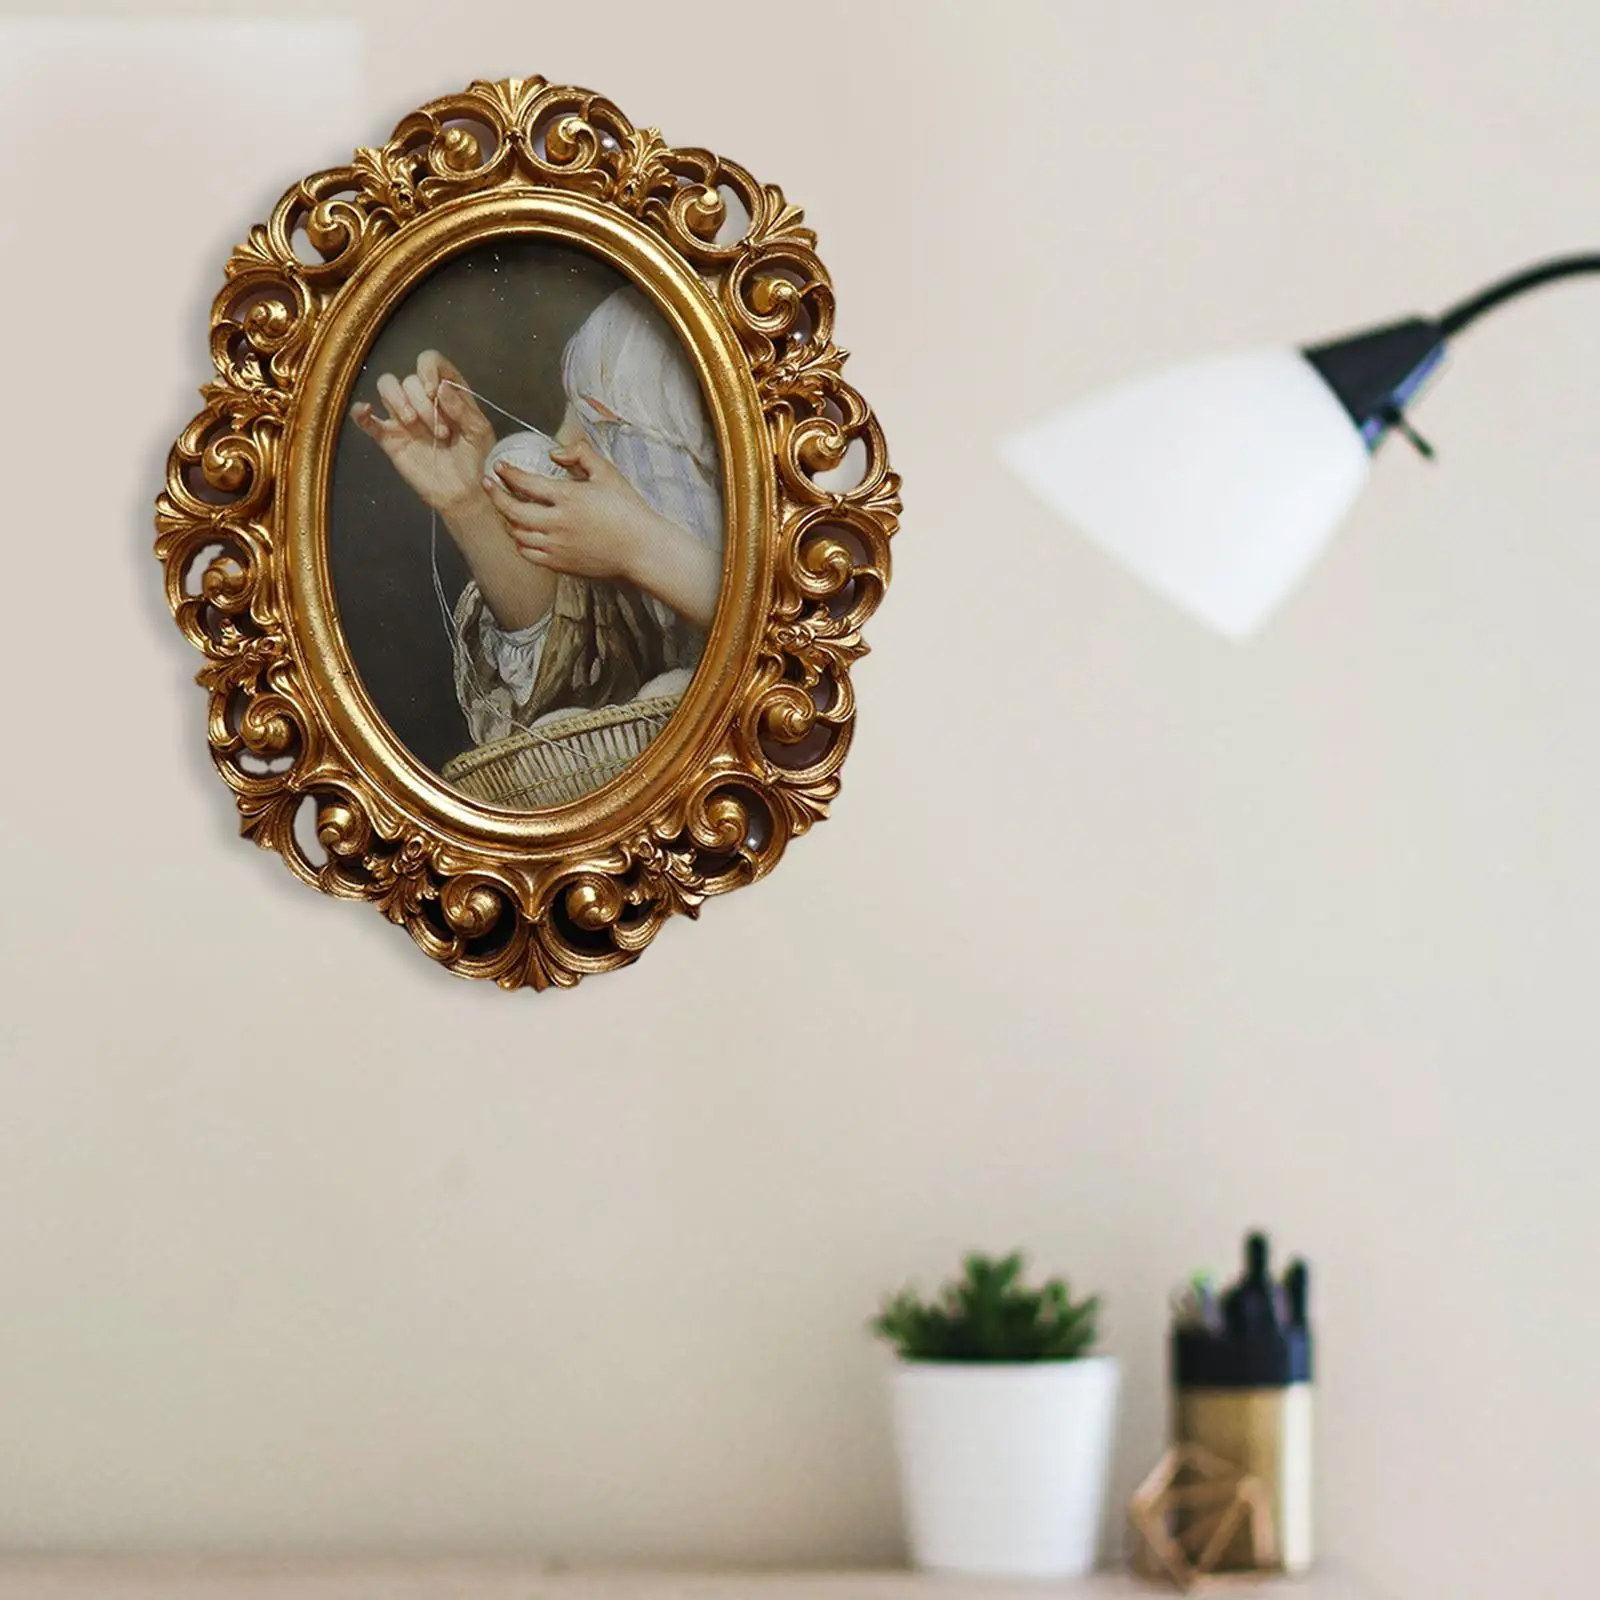 European Style Vintage Style Oval Polyresin Picture Frame Wall Mounting, Decor for Dining Room Office Photo Gallery Art Elegant